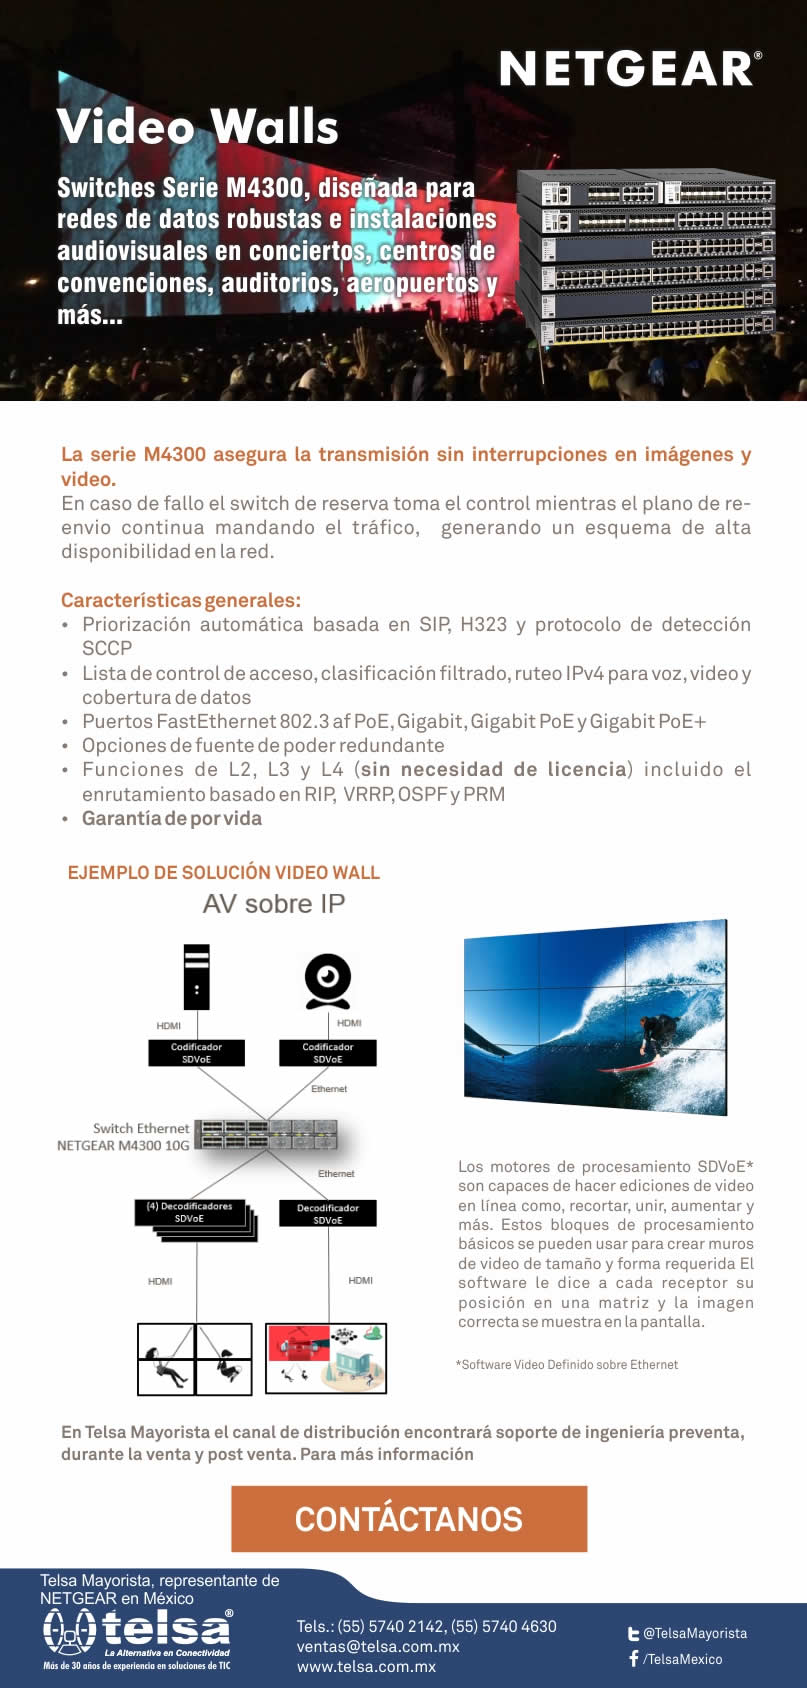 Video Walls, Switches Serie M4300, ¡Contáctanos!